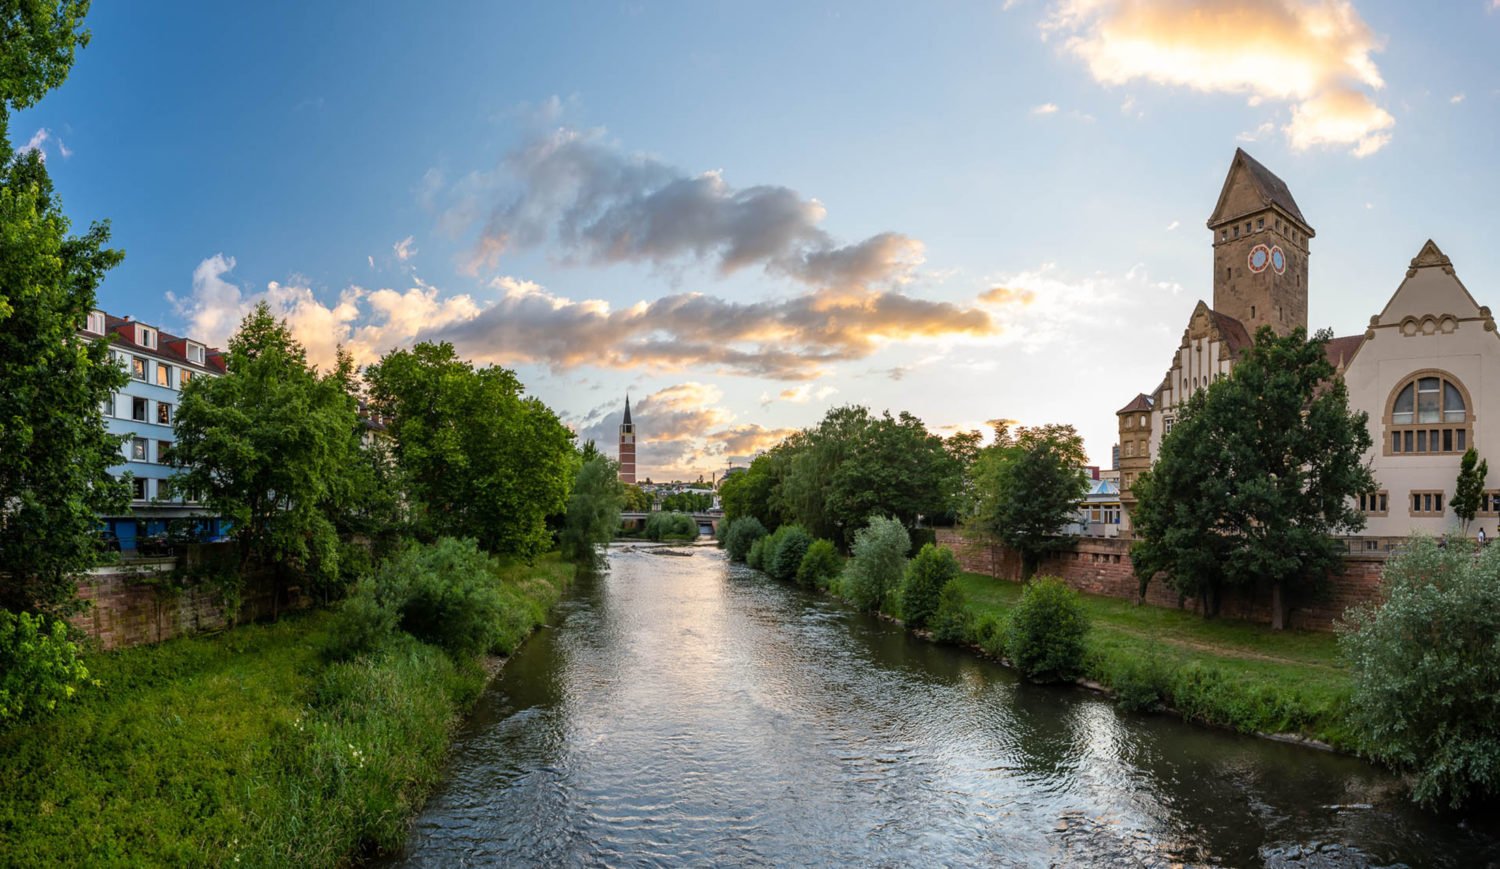 The three-river city of Pforzheim is considered the gateway to the northern Black Forest